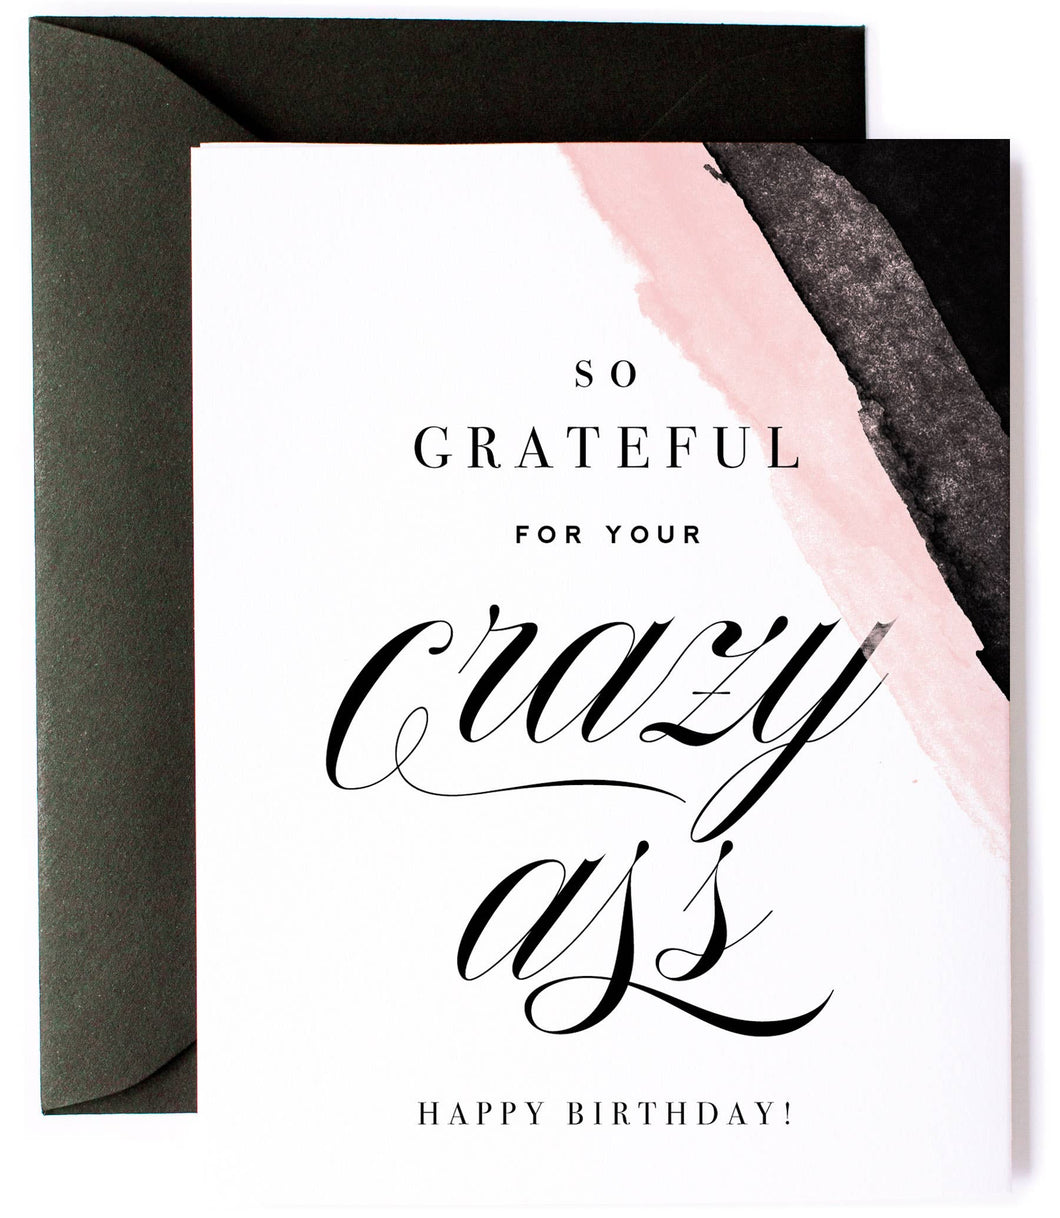 Kitty Meow Boutique - Grateful for Your Crazy Ass, Funny Birthday Card